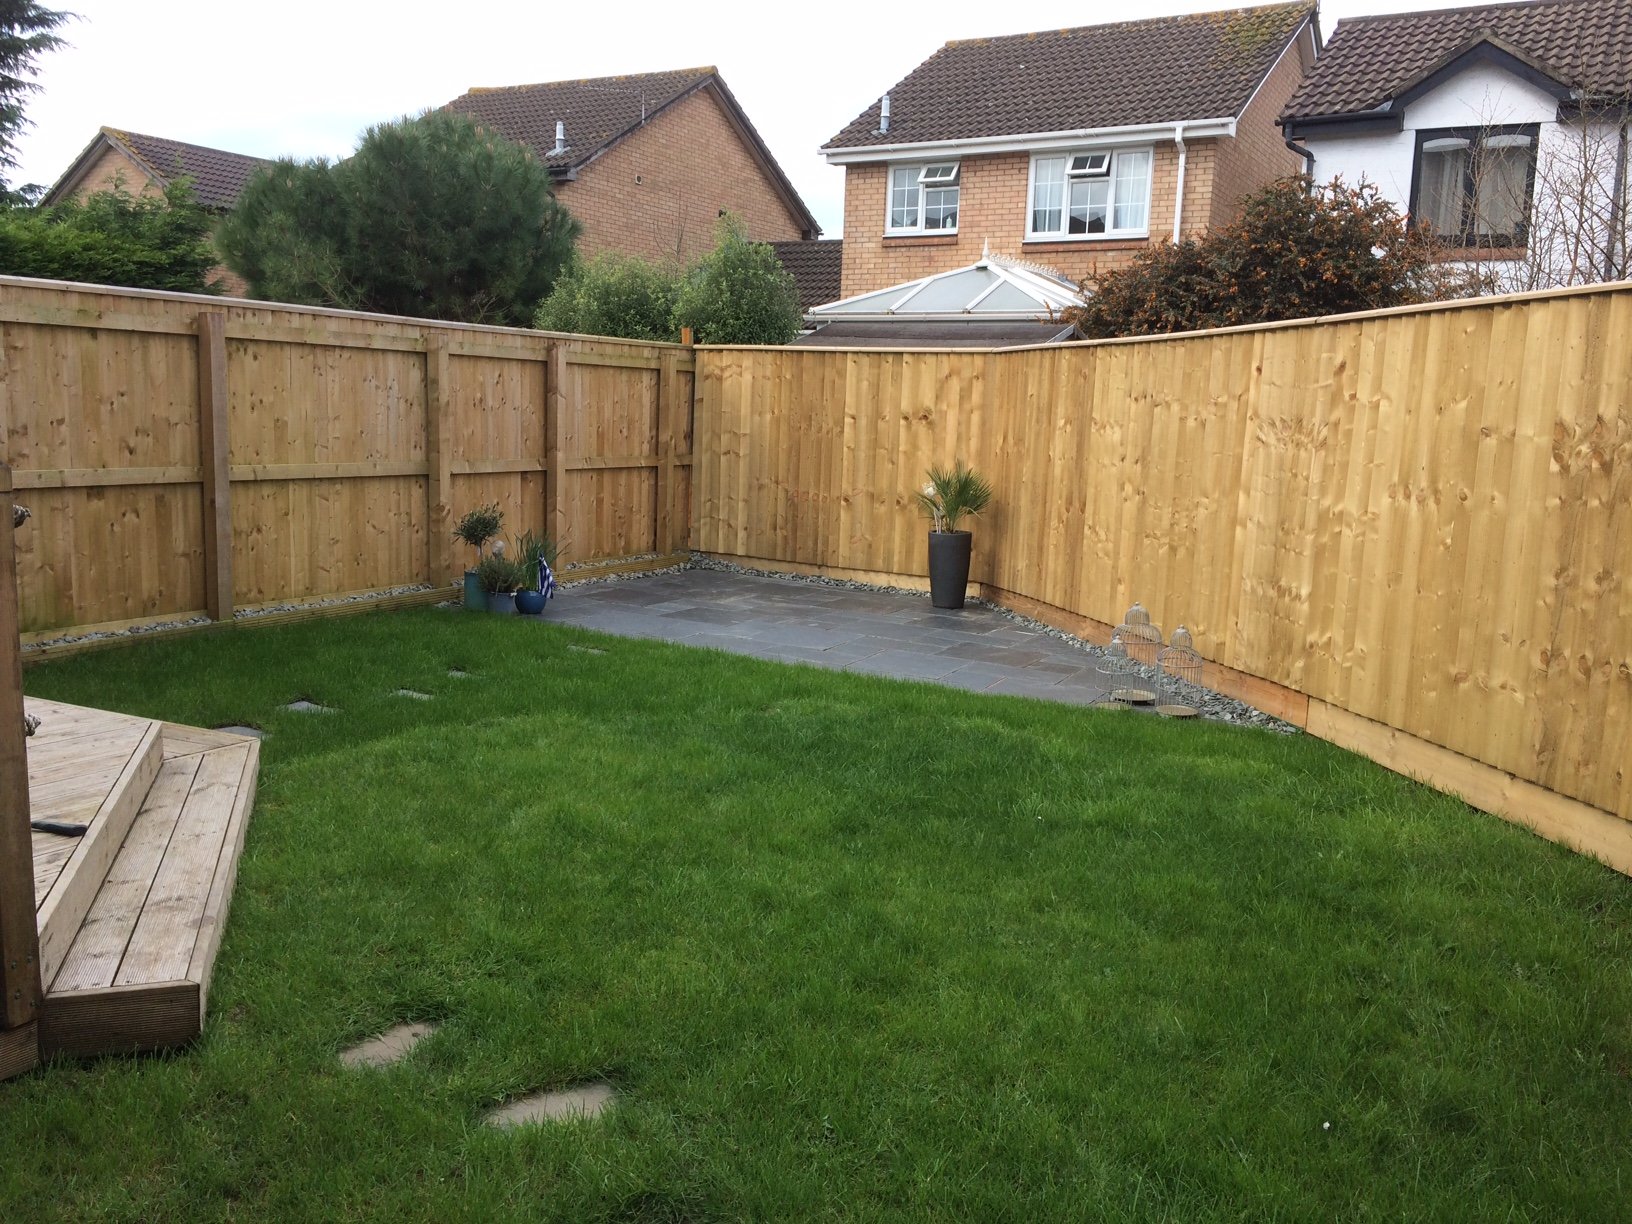 Feather edge fencing and slate patio